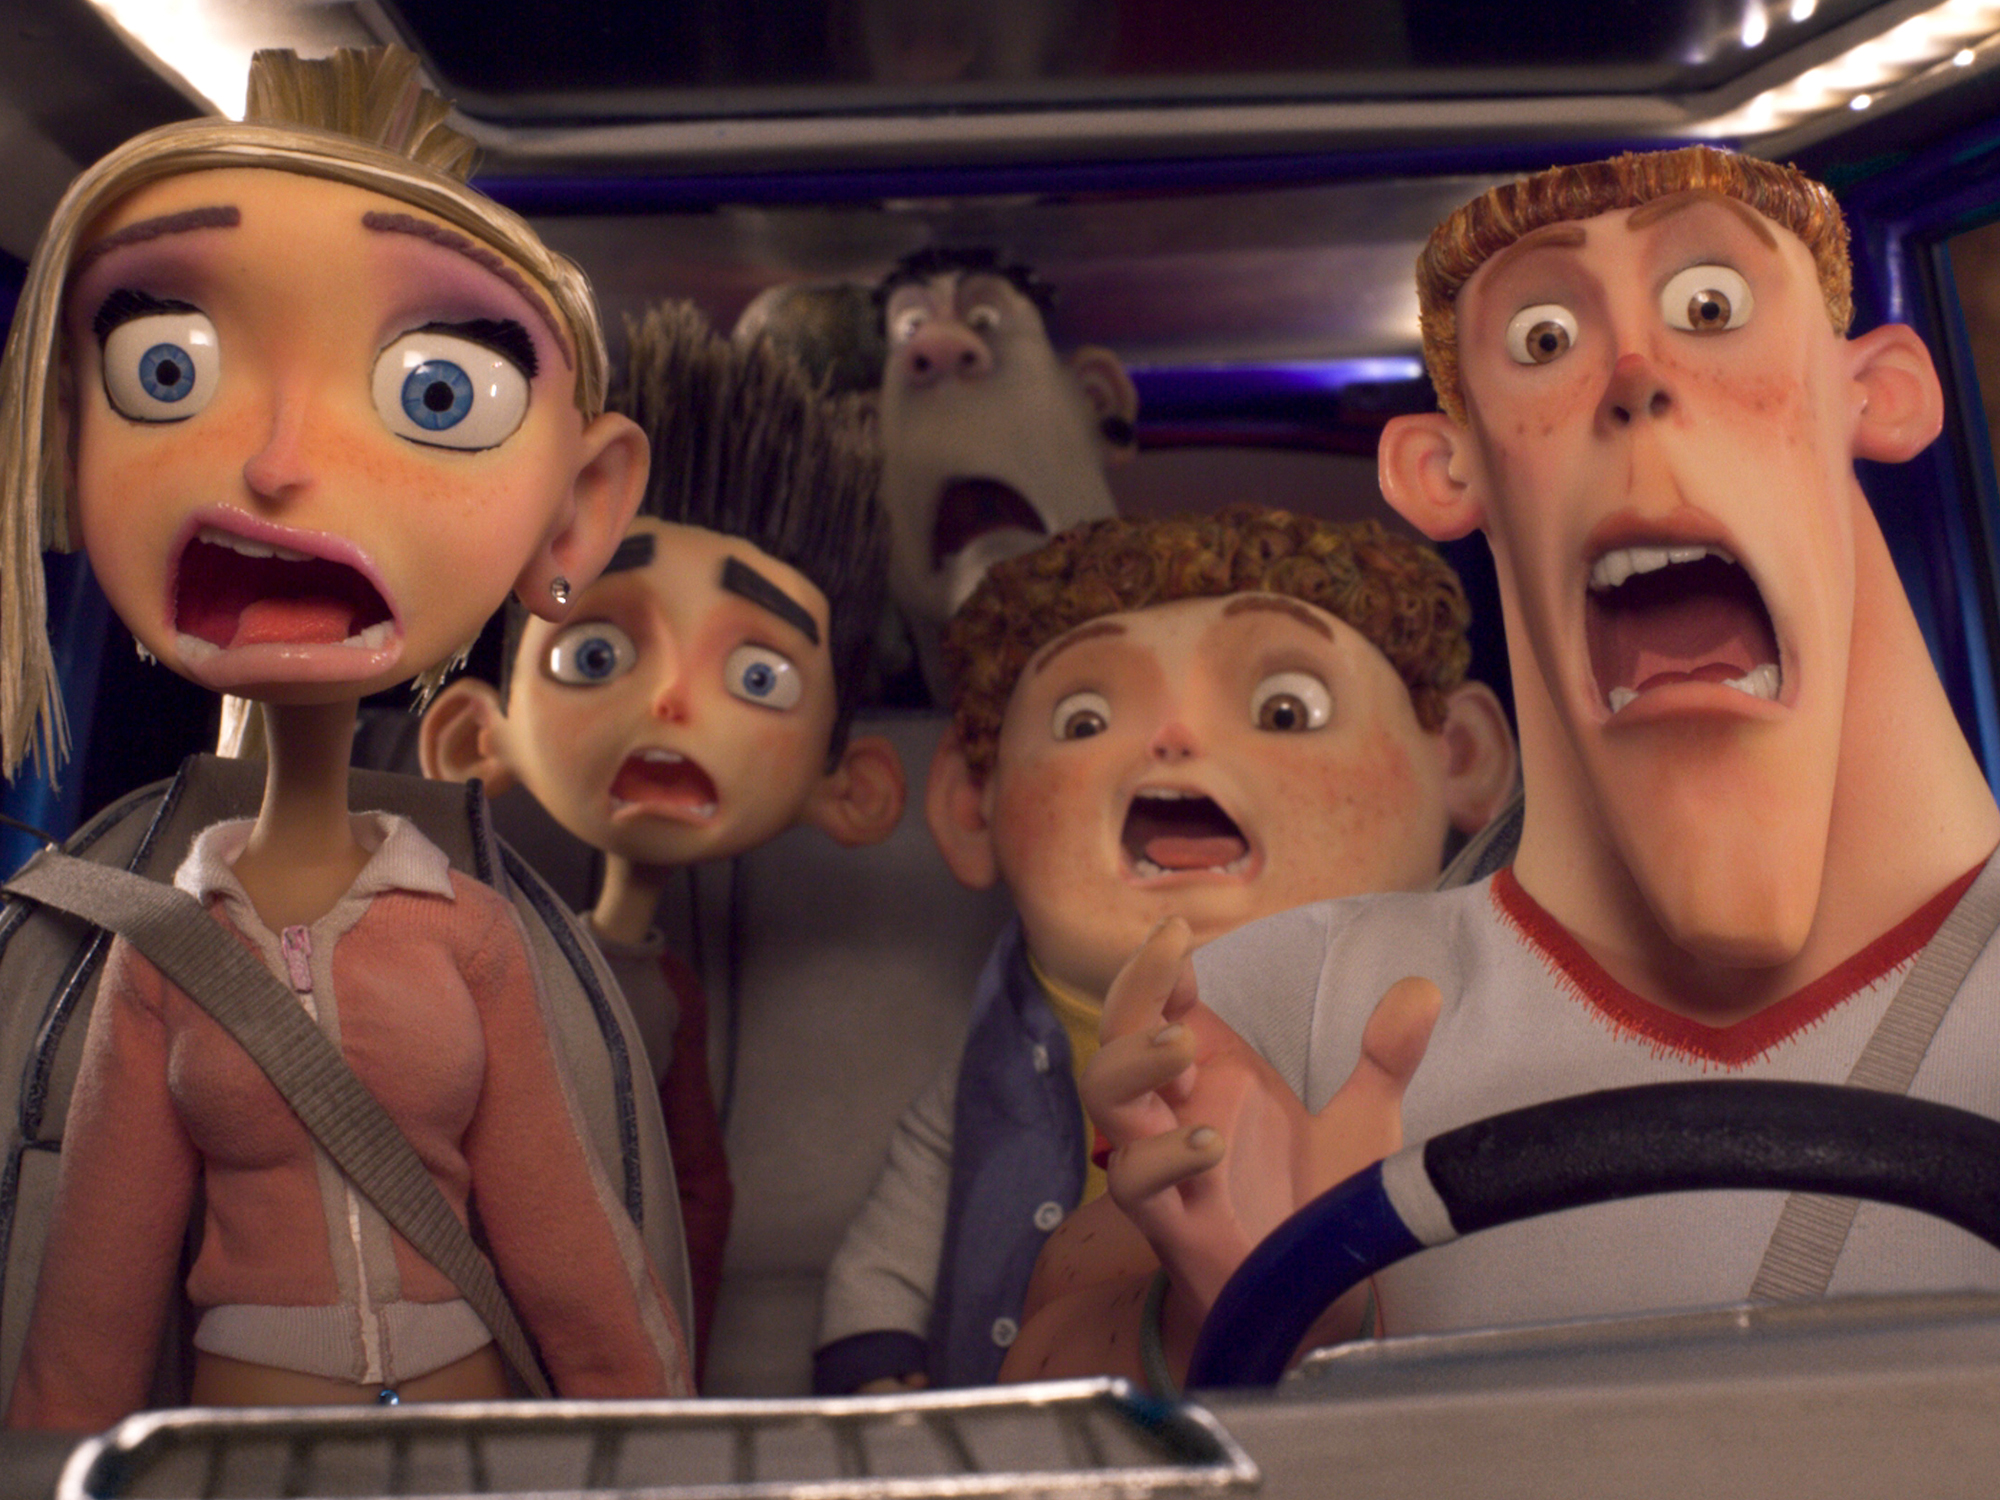 Chris Butler on ParaNorman: 'We wanted it to feel like a rollercoaster'